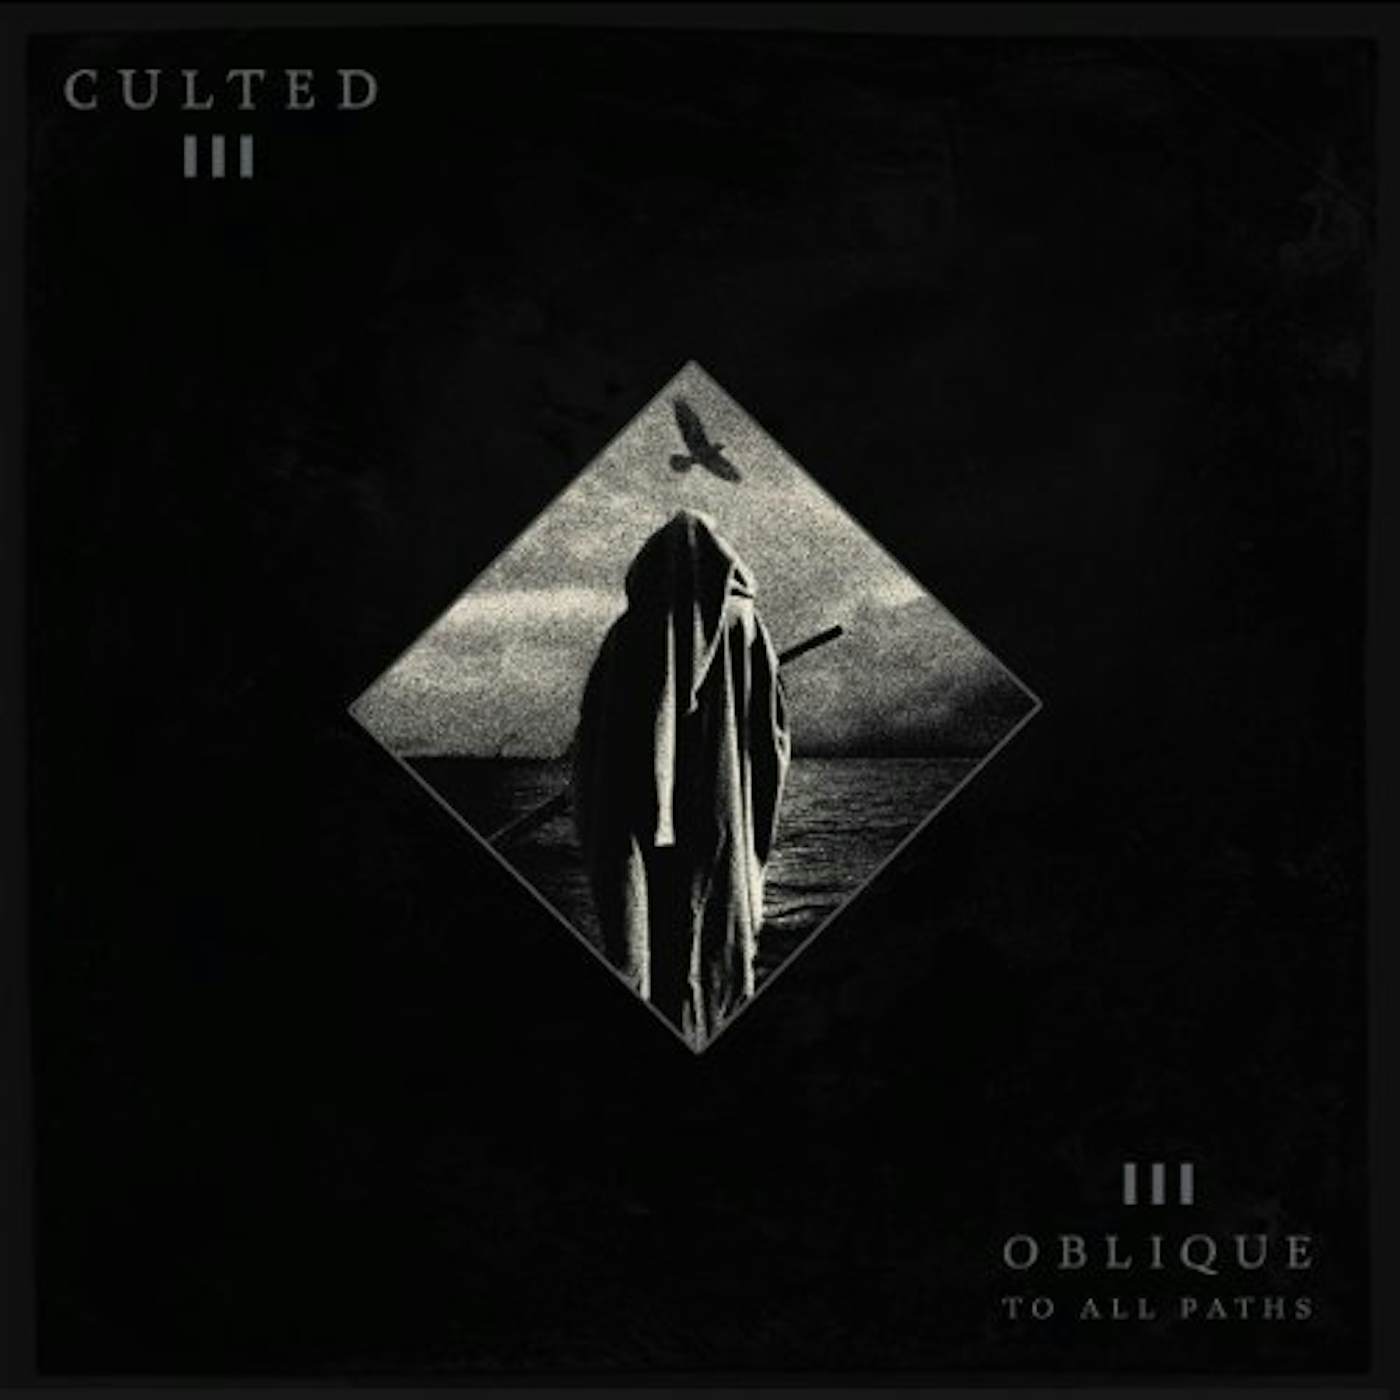 Culted Oblique to All Paths Vinyl Record